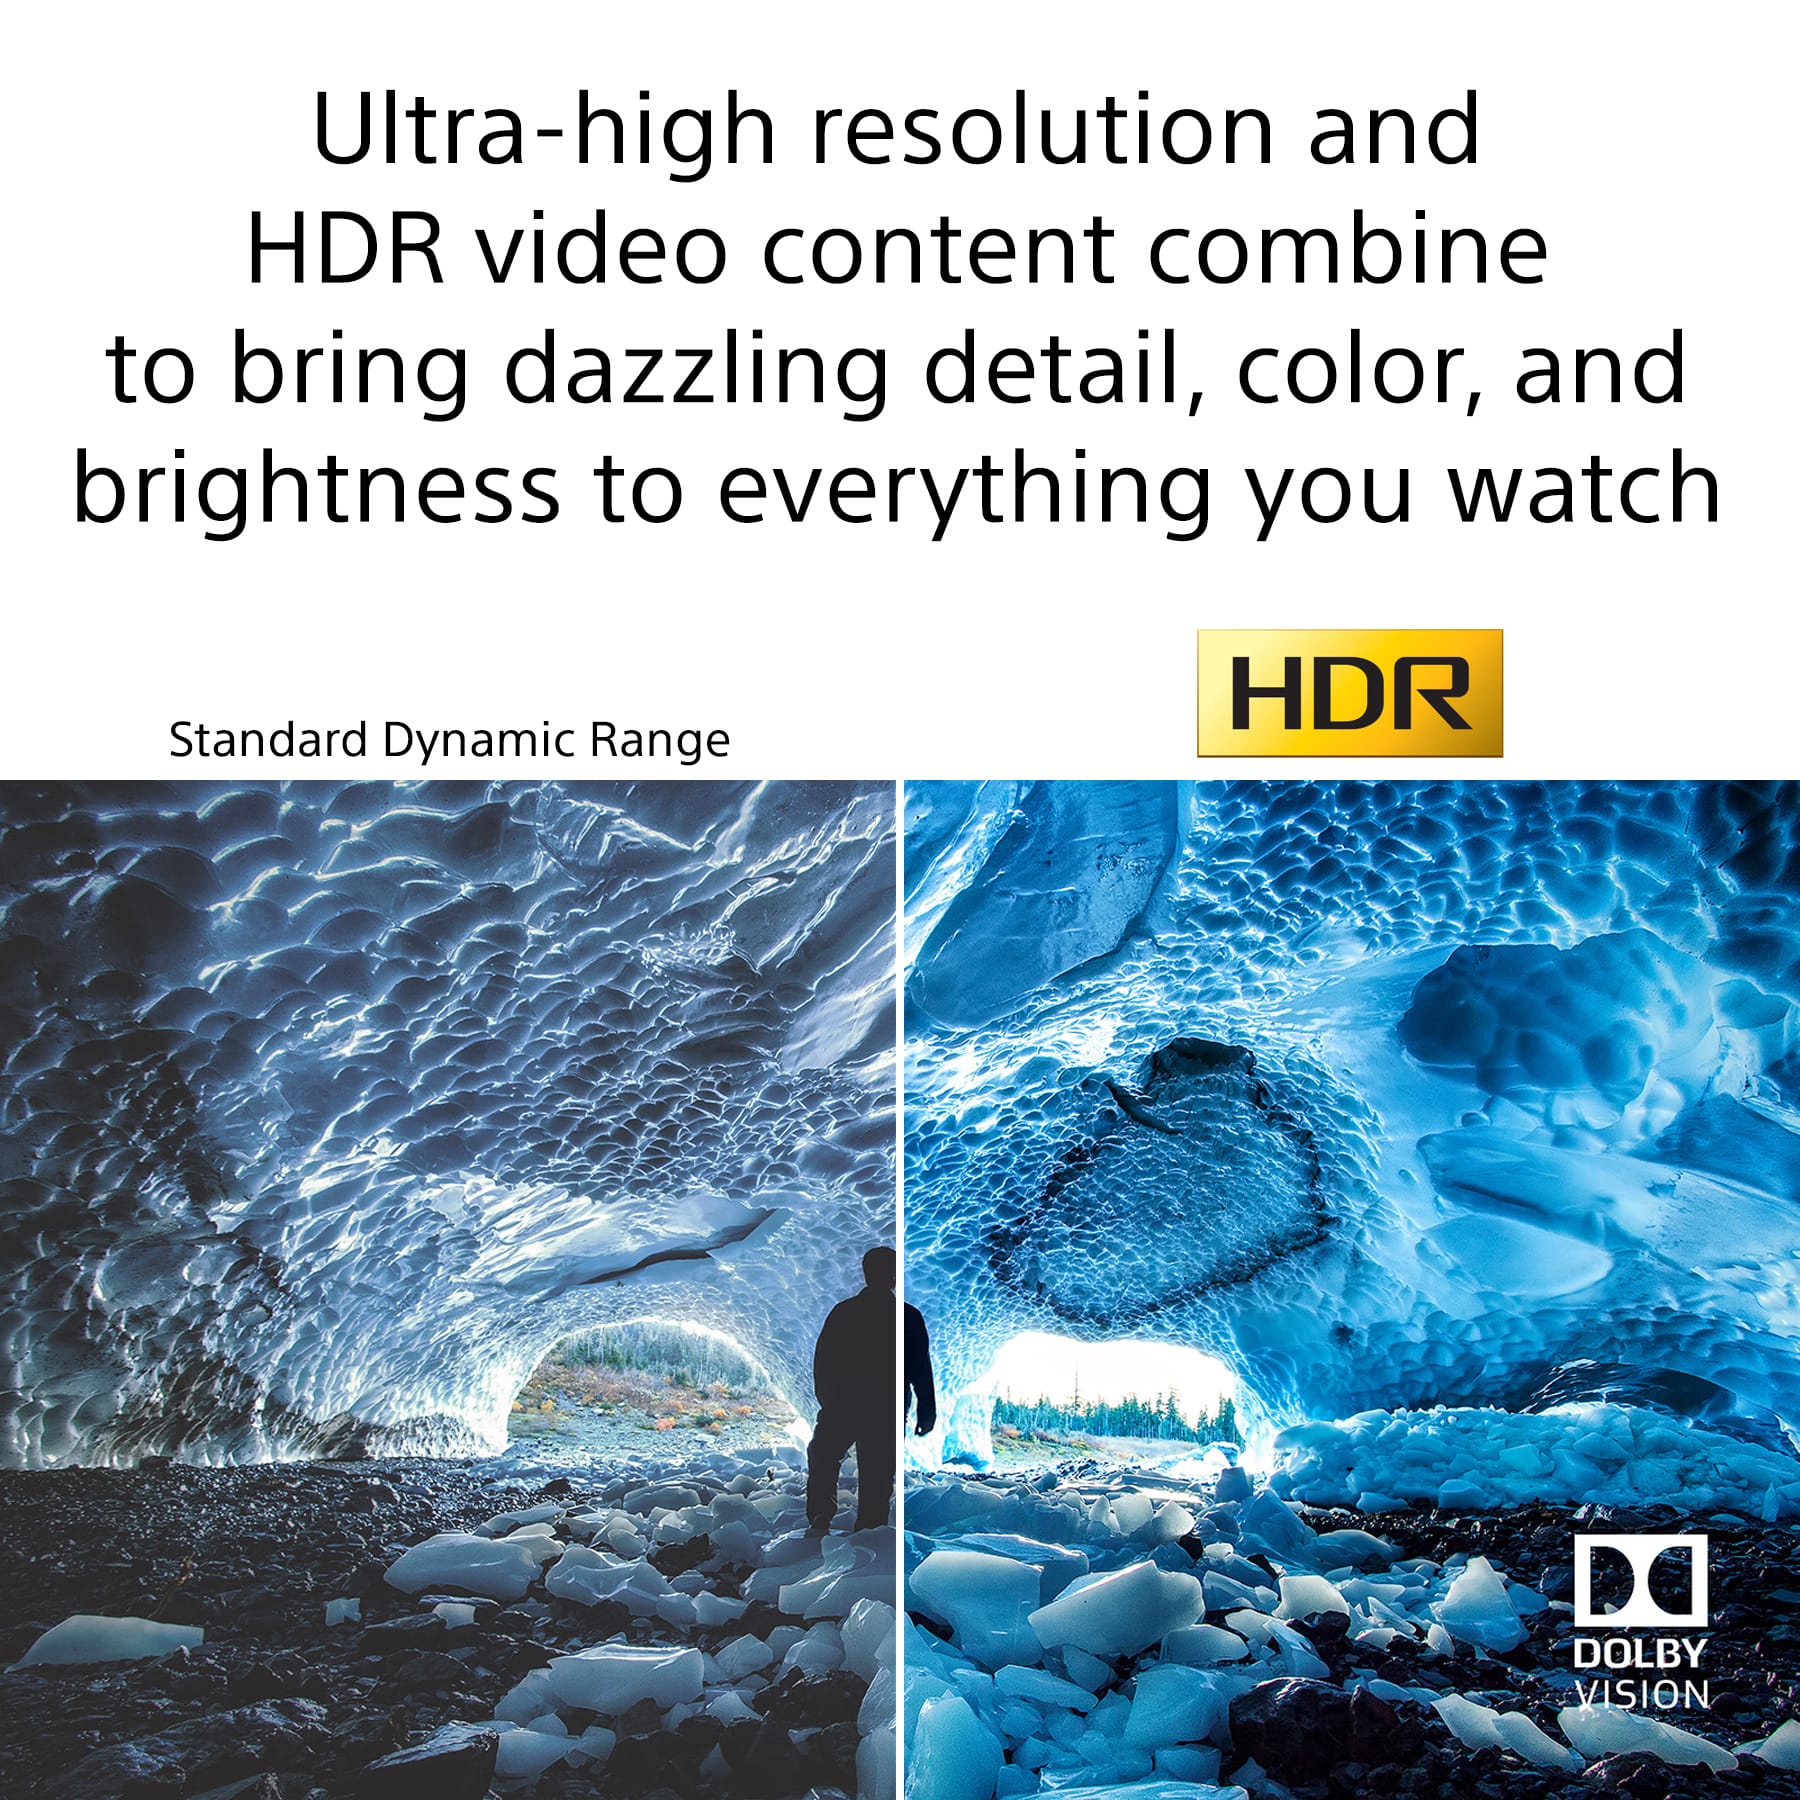 HDR and Dolby Vision X91J